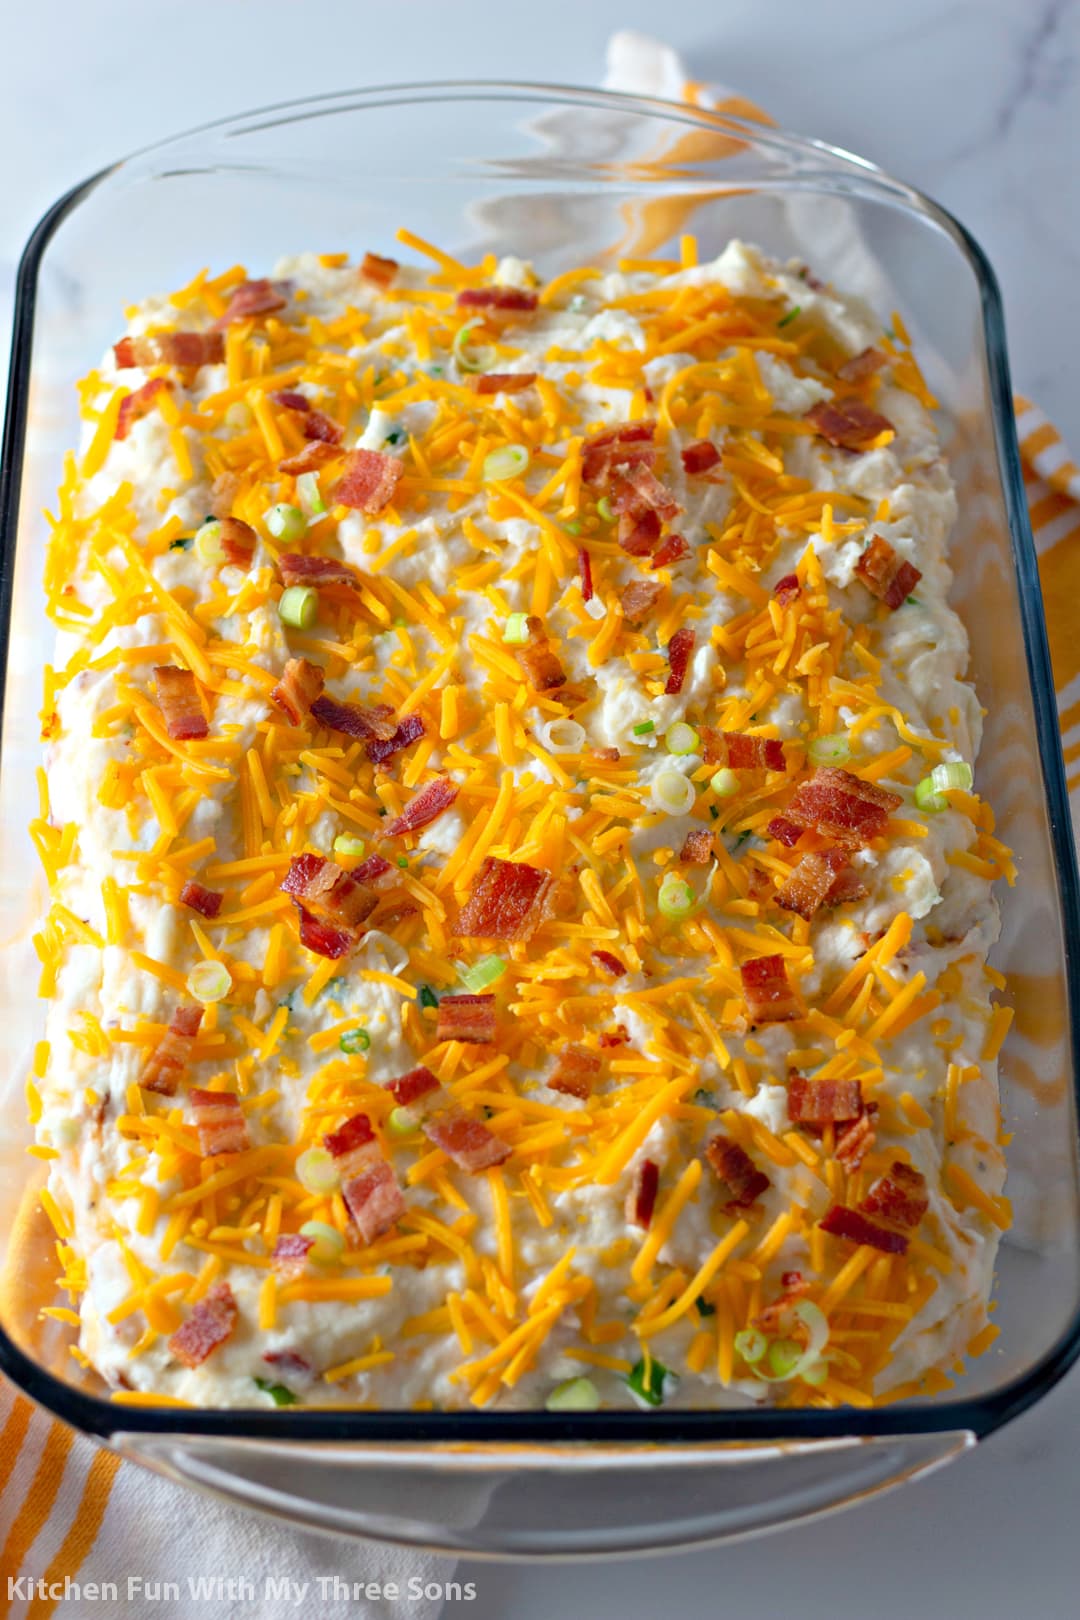 Mashed potatoes topped with cheese and bacon in a glass baking dish